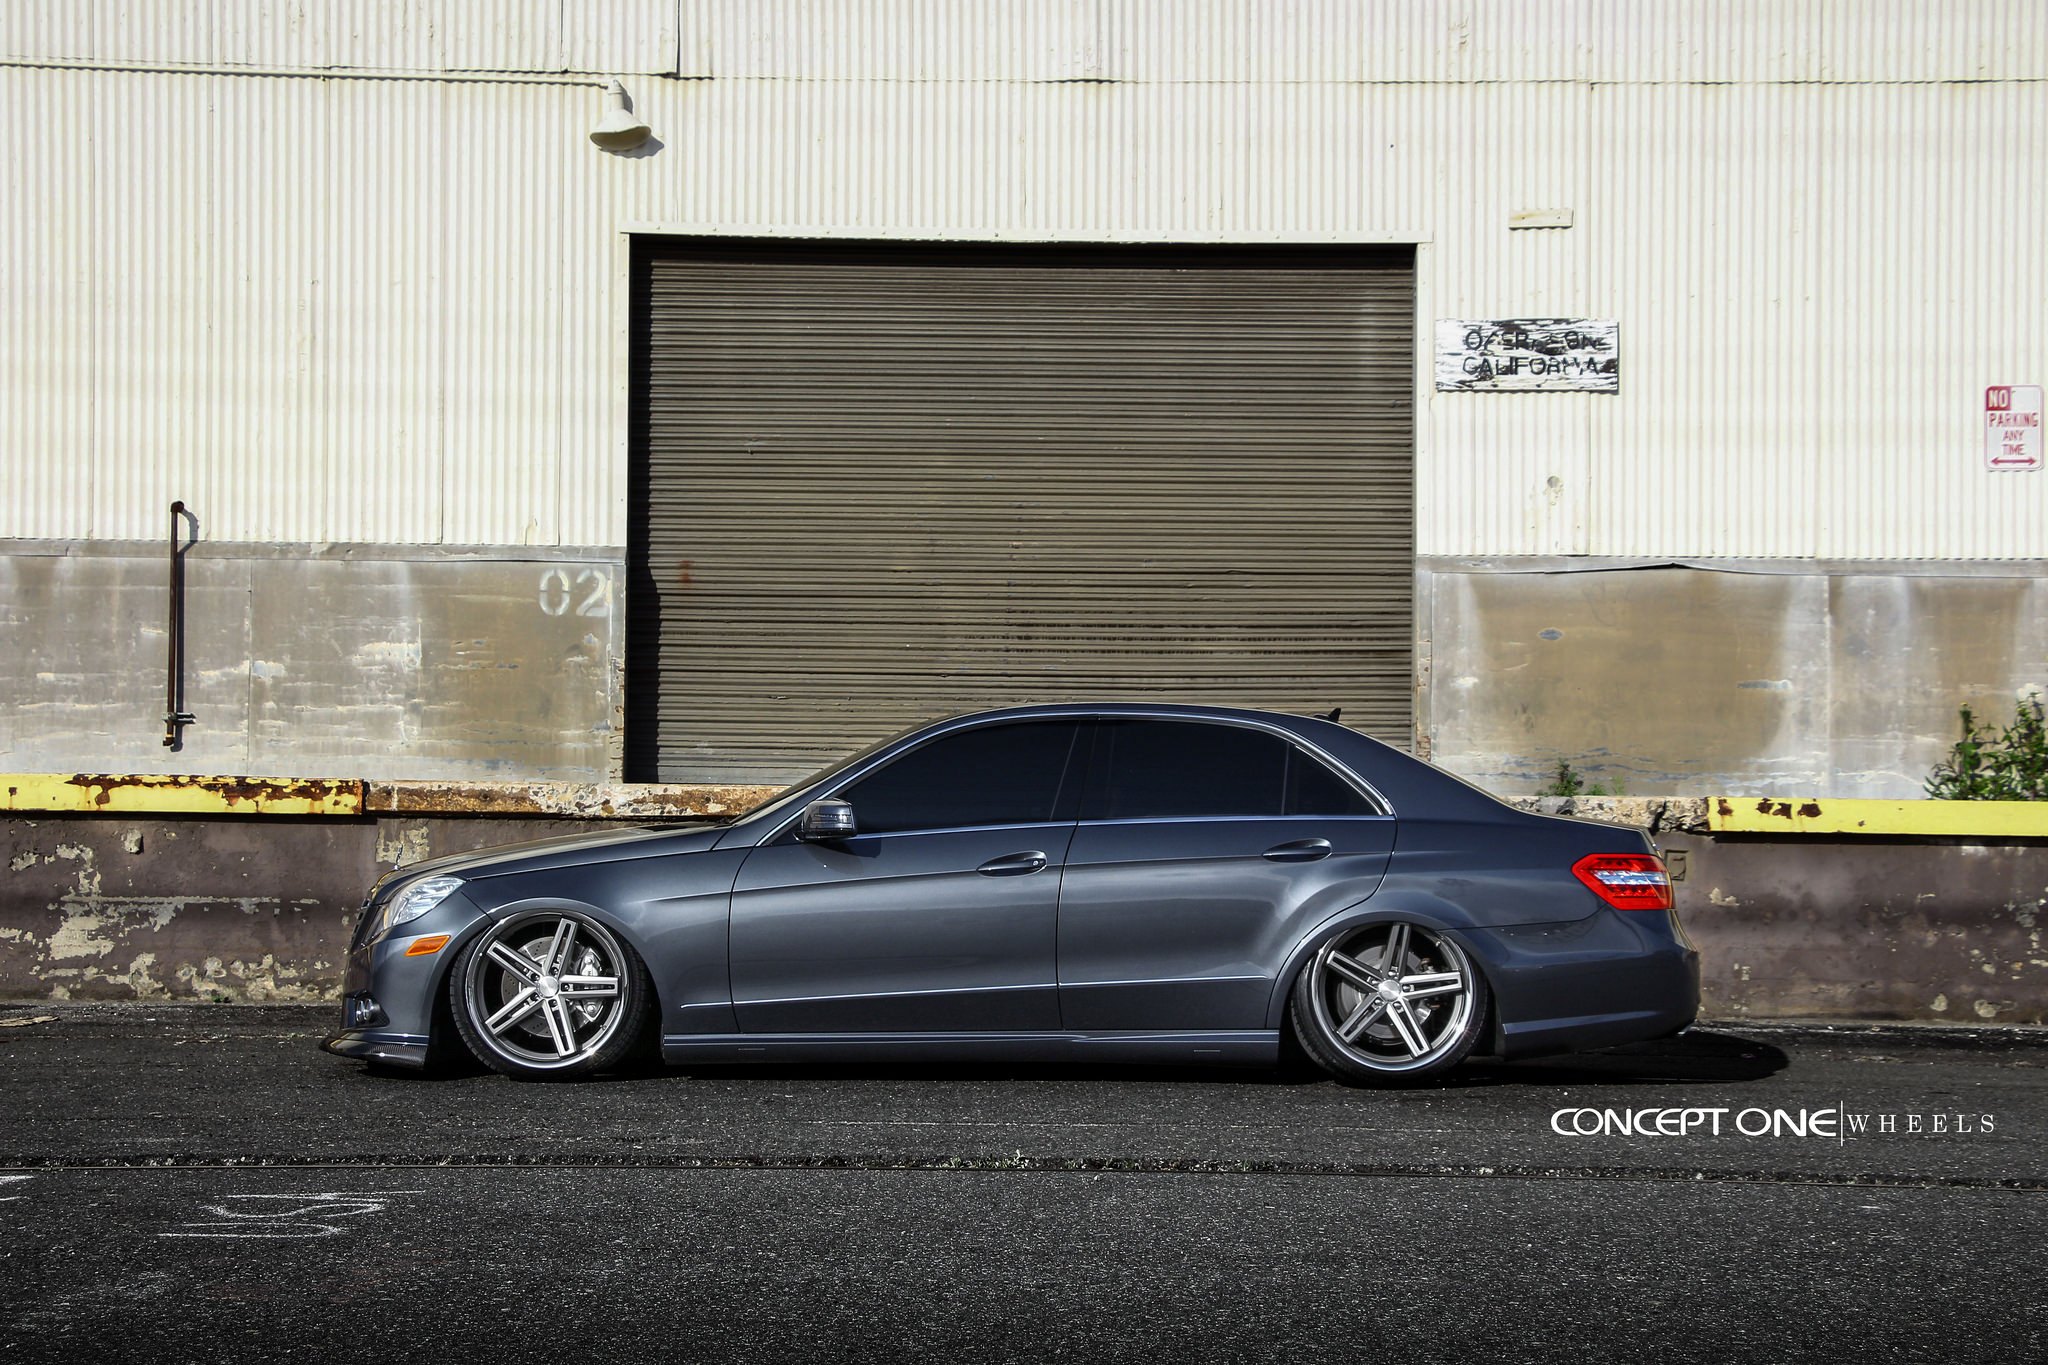 Aftermarket Side Skirts on Gray Mercedes E-Class - Photo by Concept One